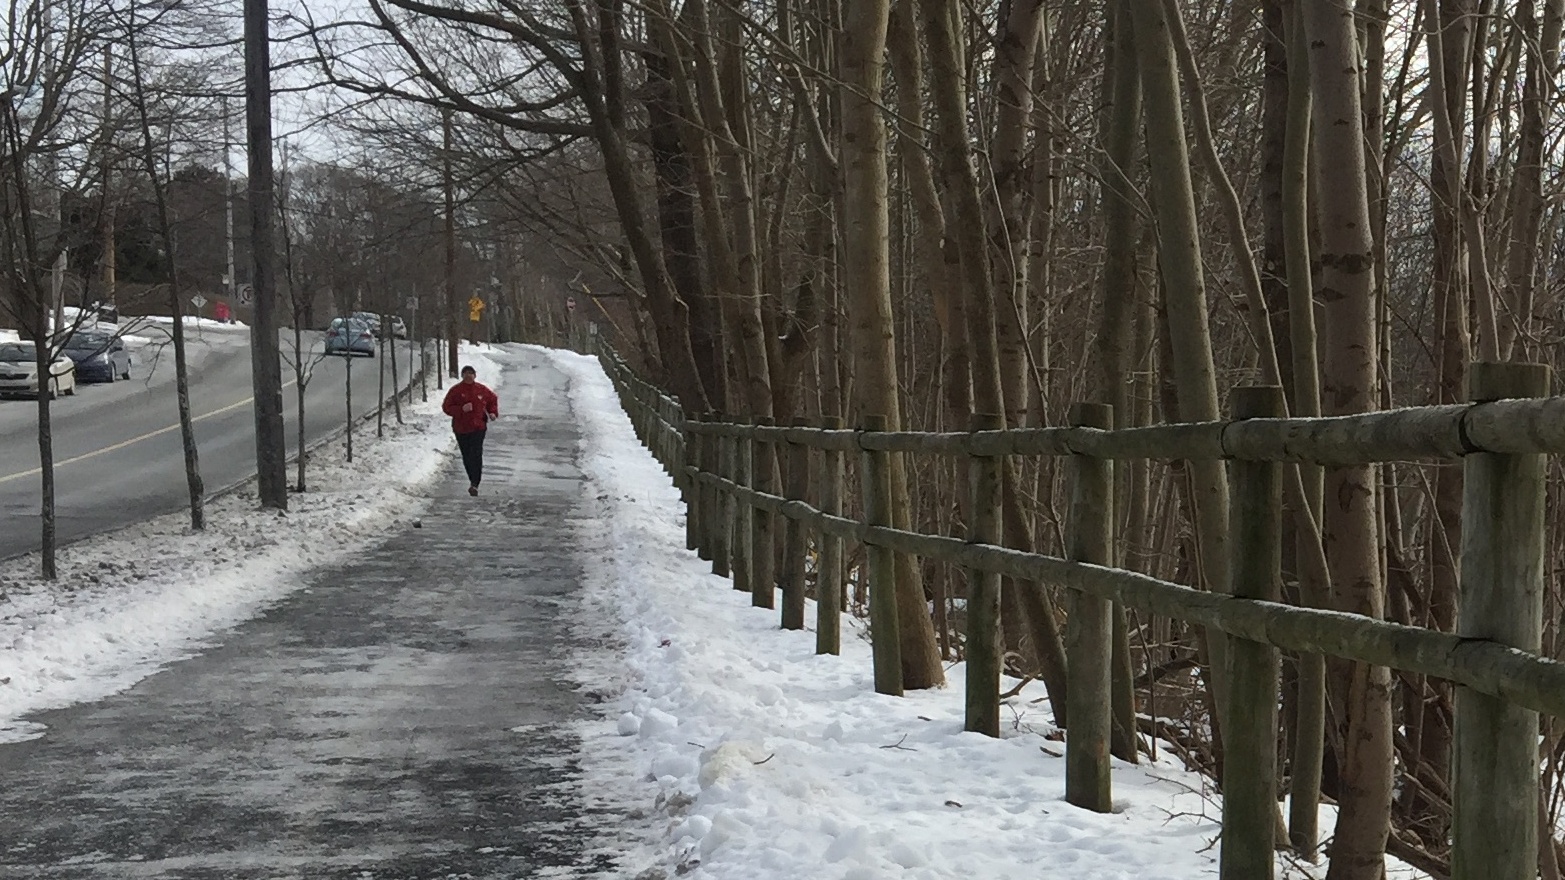 Trails similar to this one along Beaufort Avenue join together to make the Great Trail network throughout Nova Scotia.